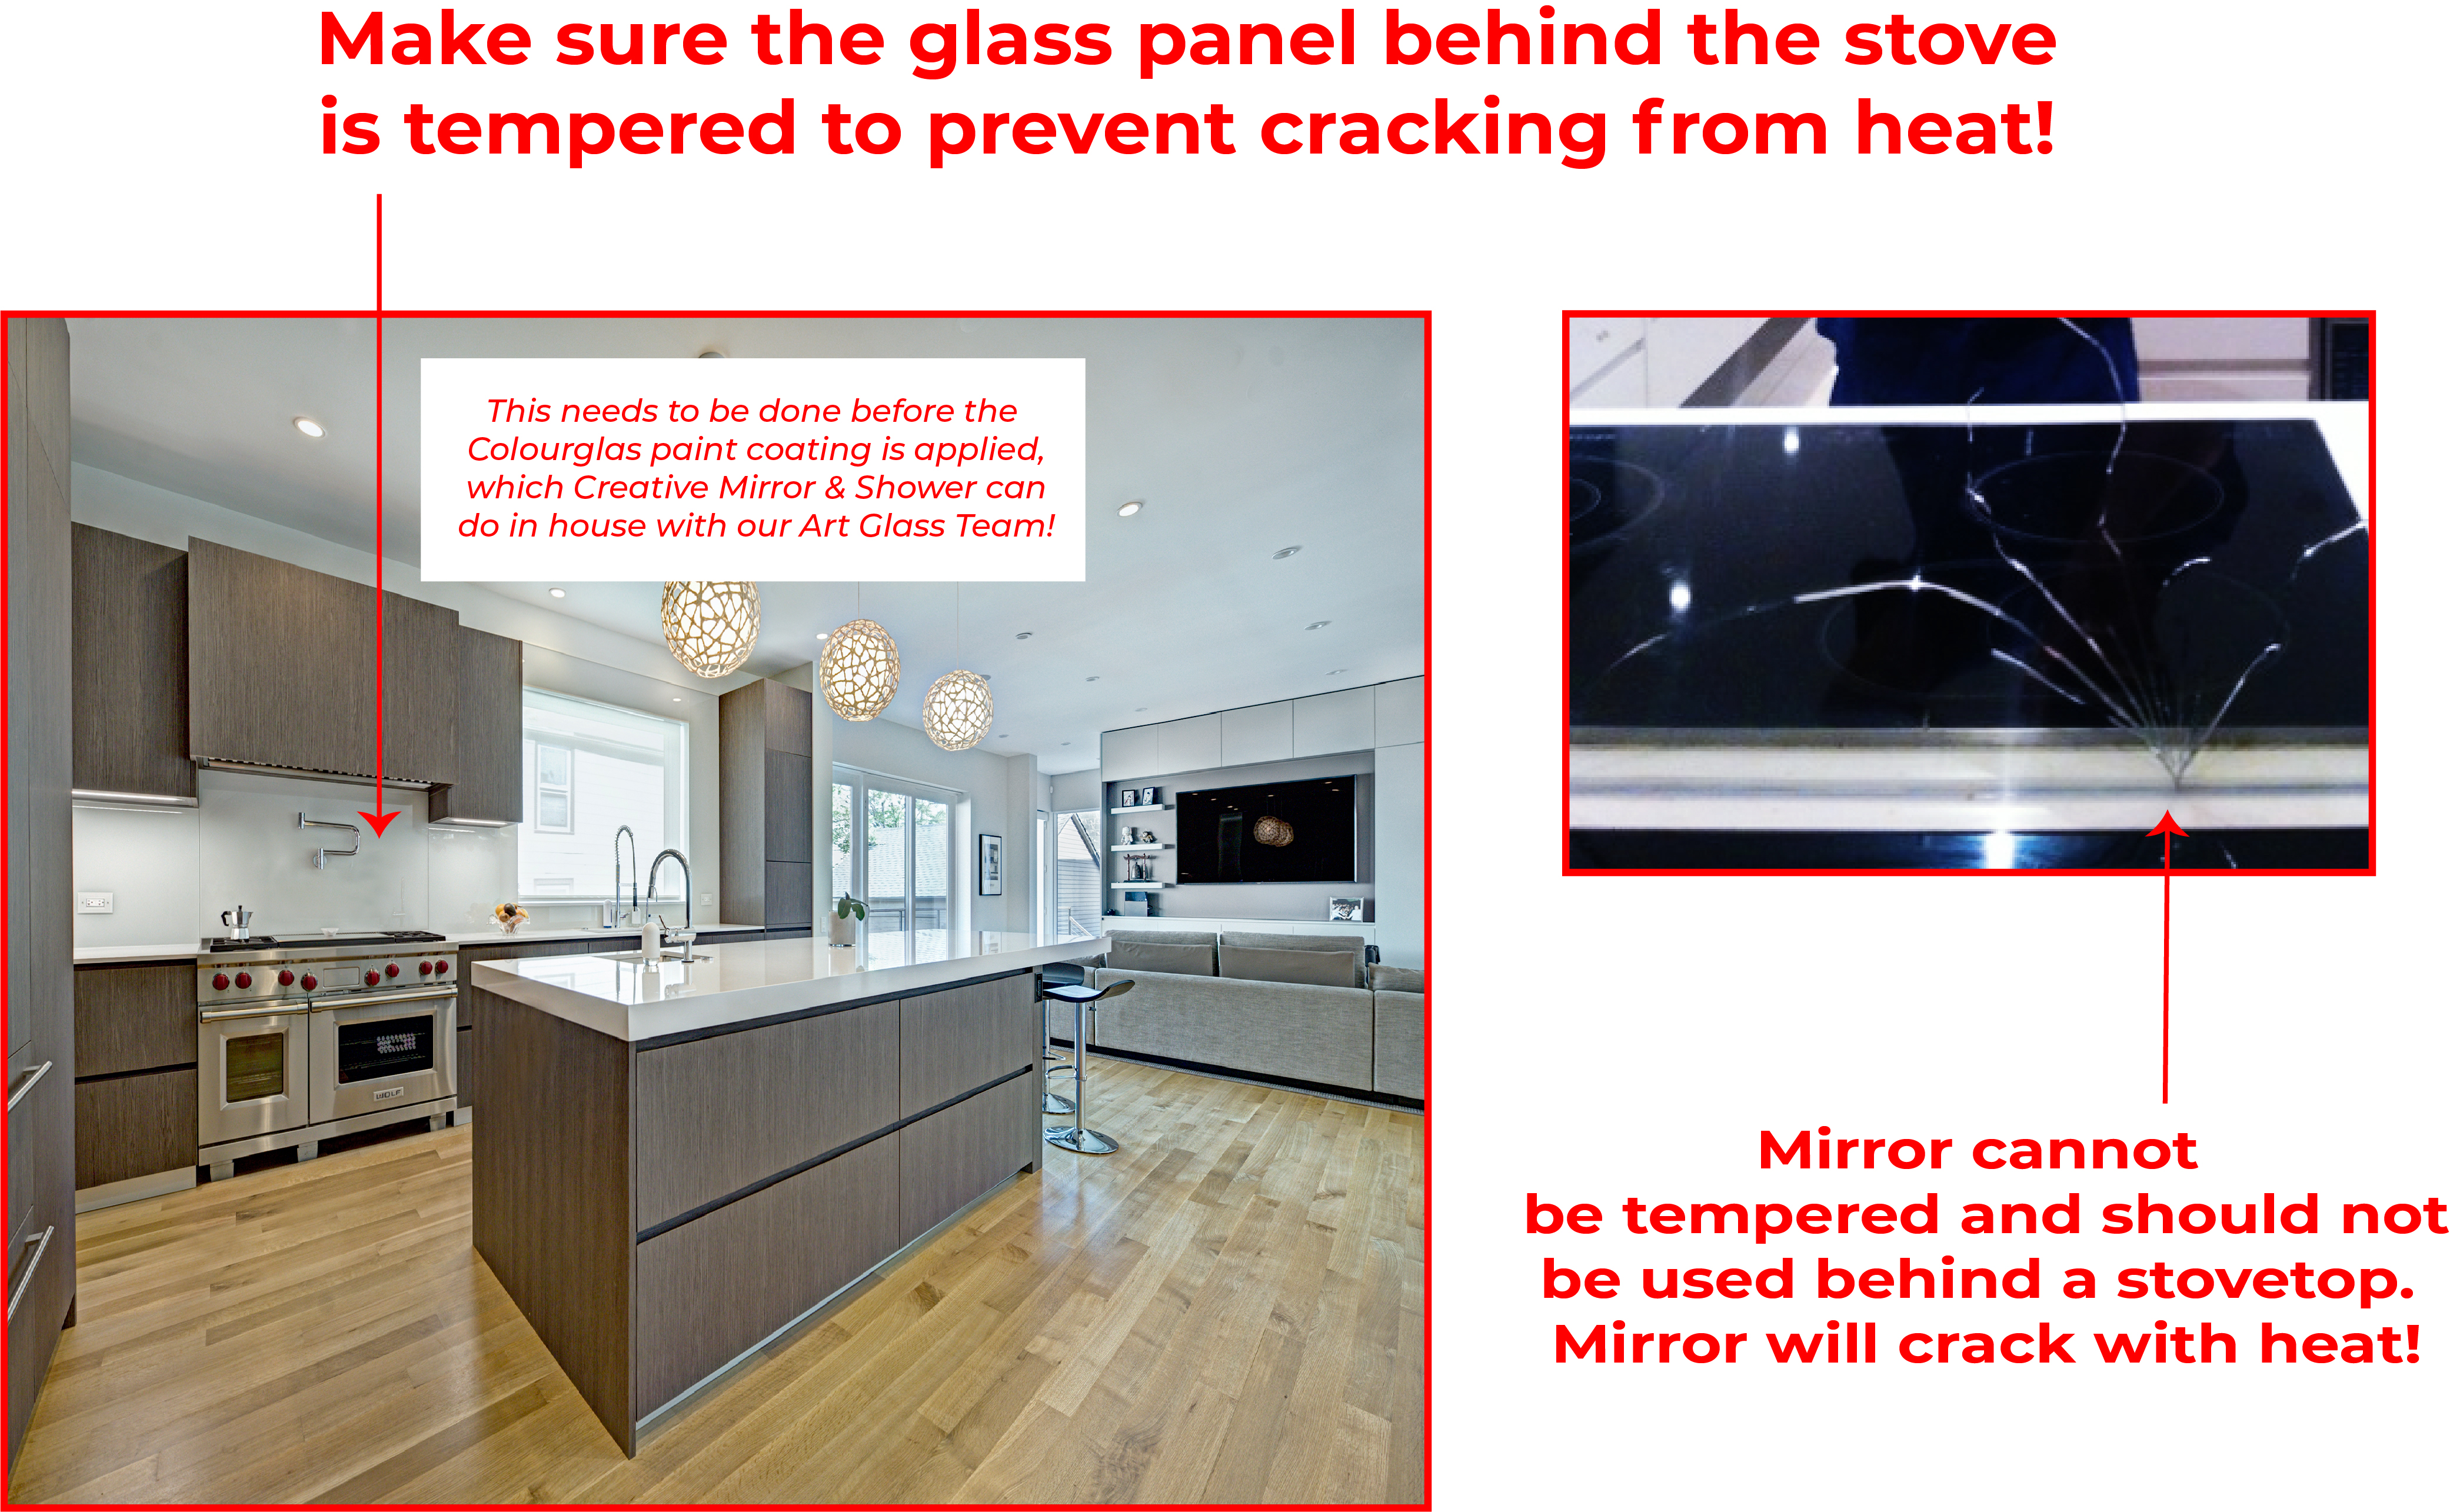 Make Sure Glass Panel Behind Stove Is Tempered To Prevent Cracking From Heat